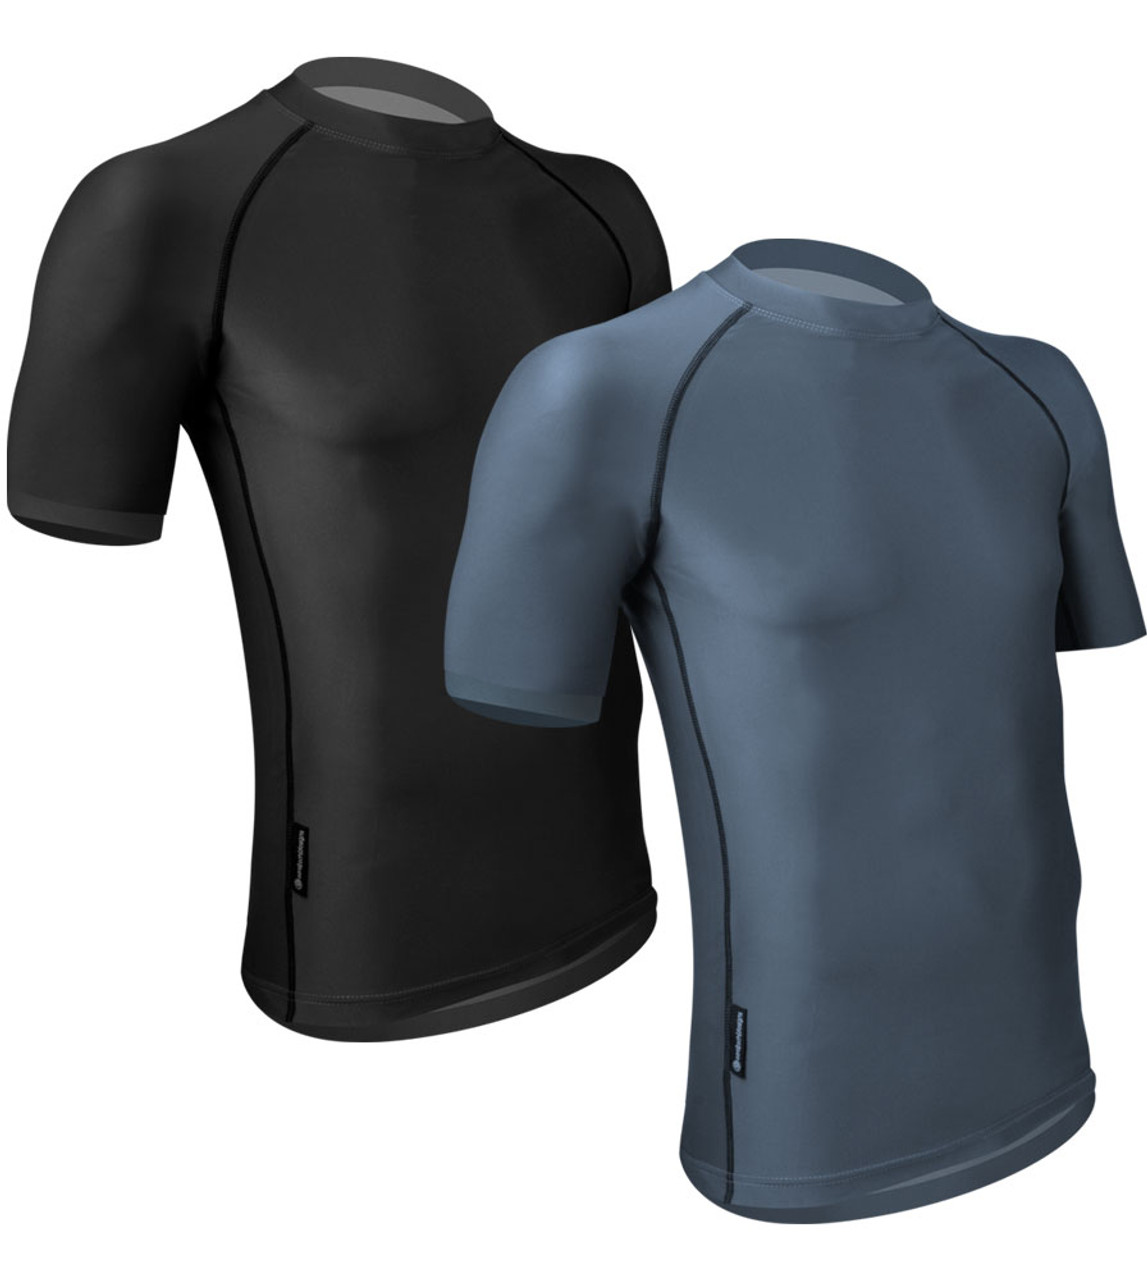  Shorts - Base Layers & Compression: Clothing & Accessories